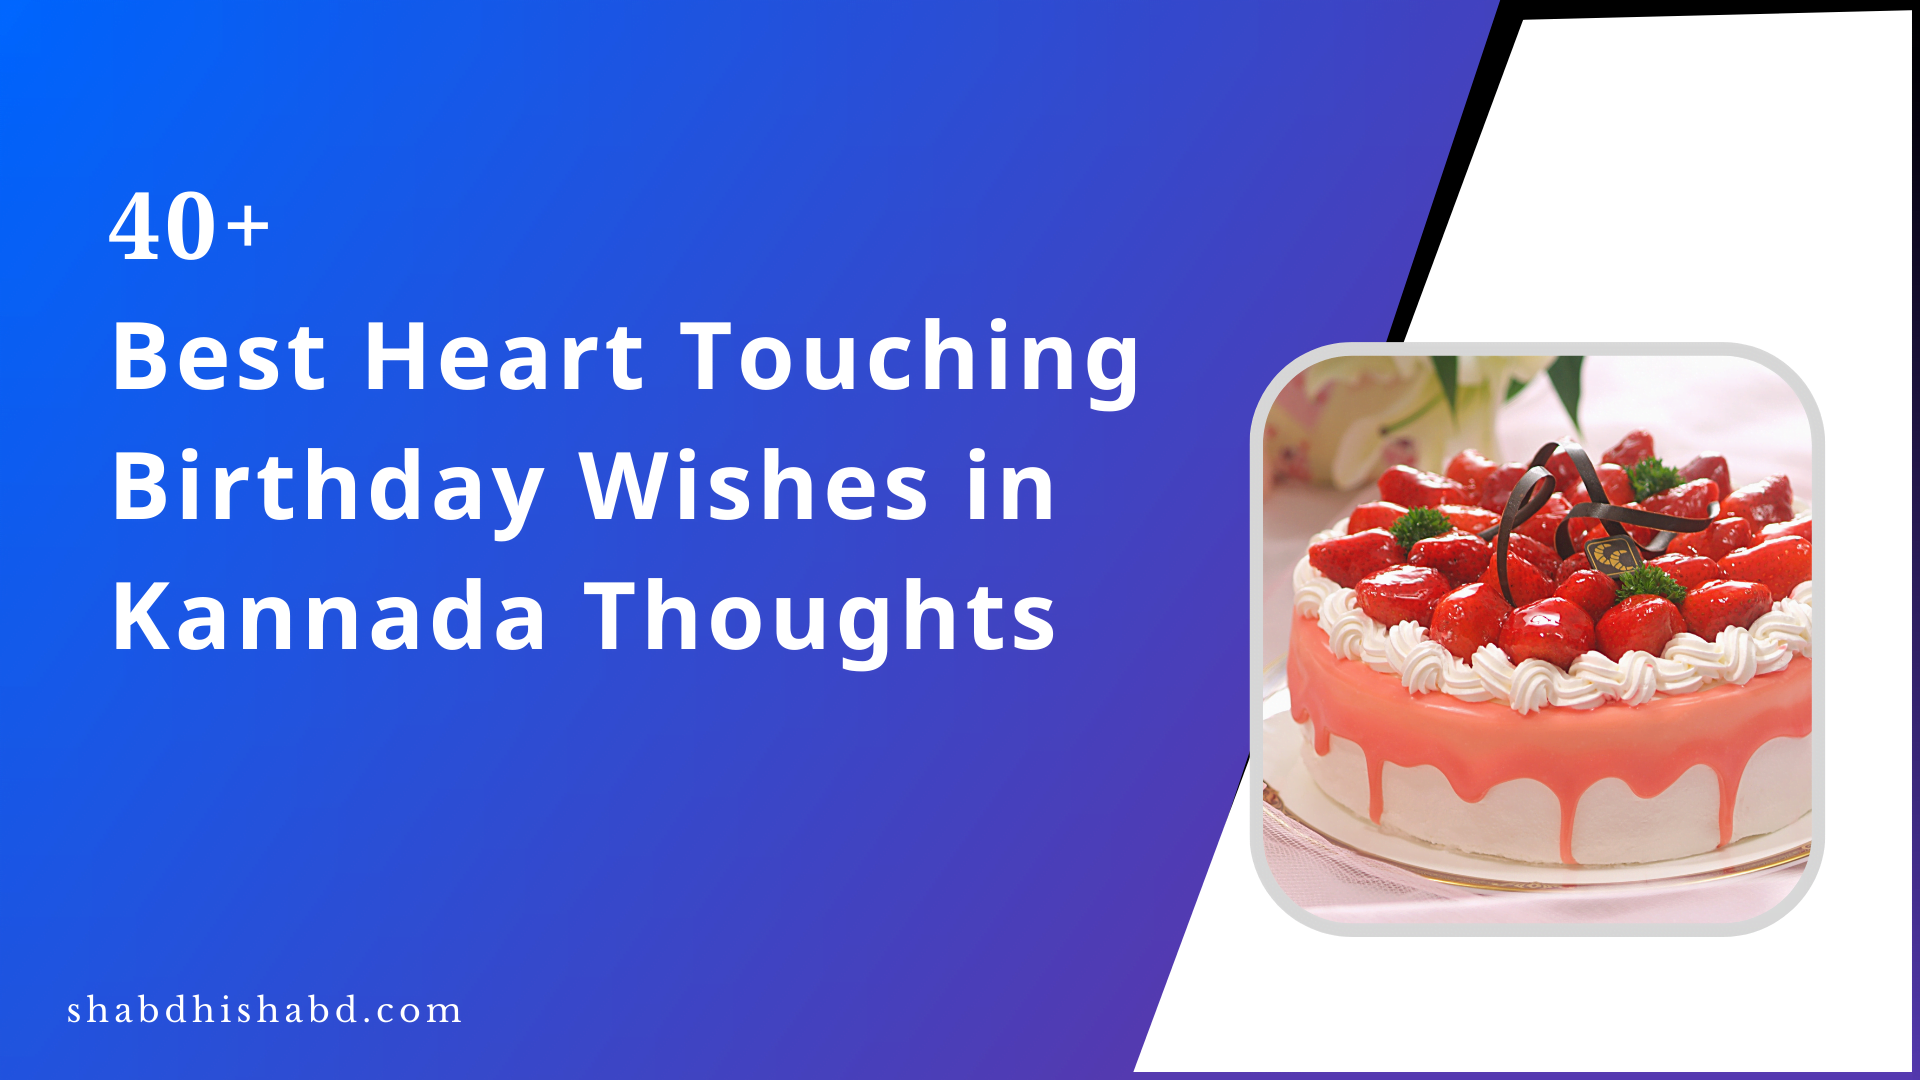 40+ Best Heart Touching Birthday Wishes in Kannada Thoughts